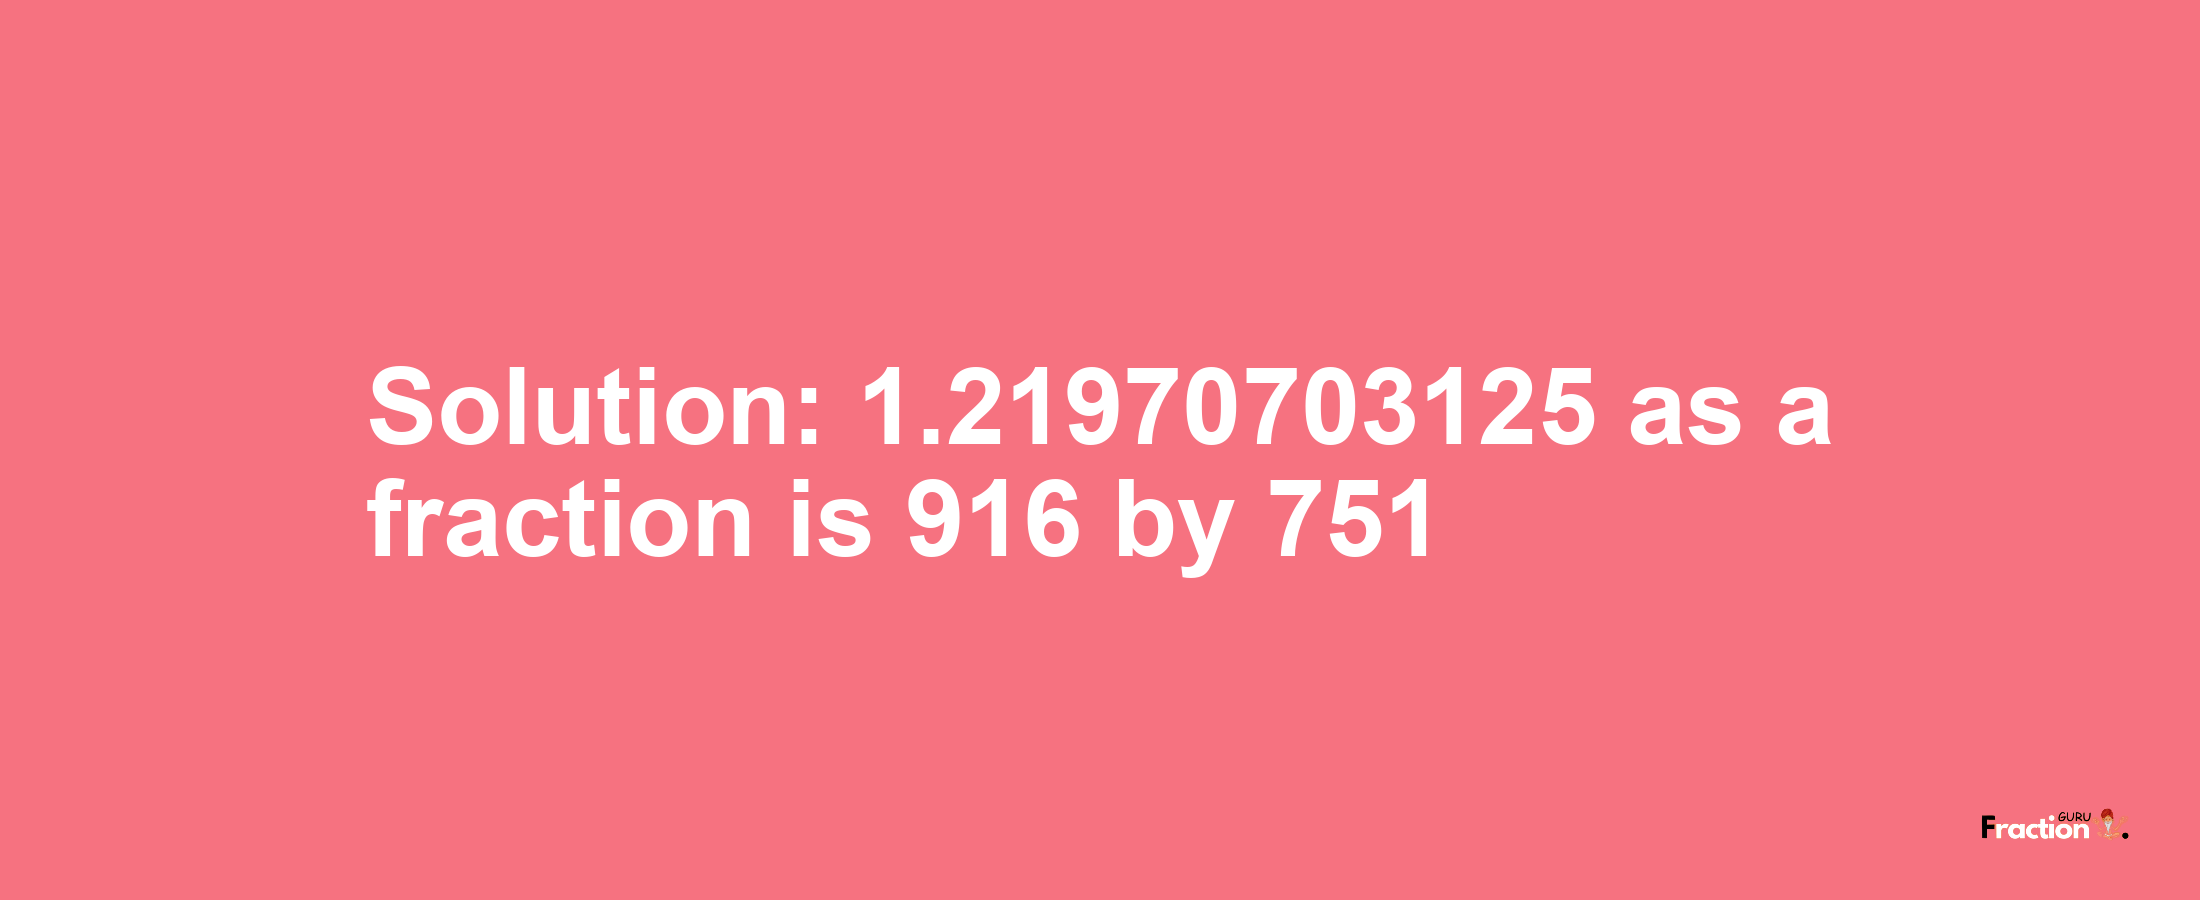 Solution:1.21970703125 as a fraction is 916/751